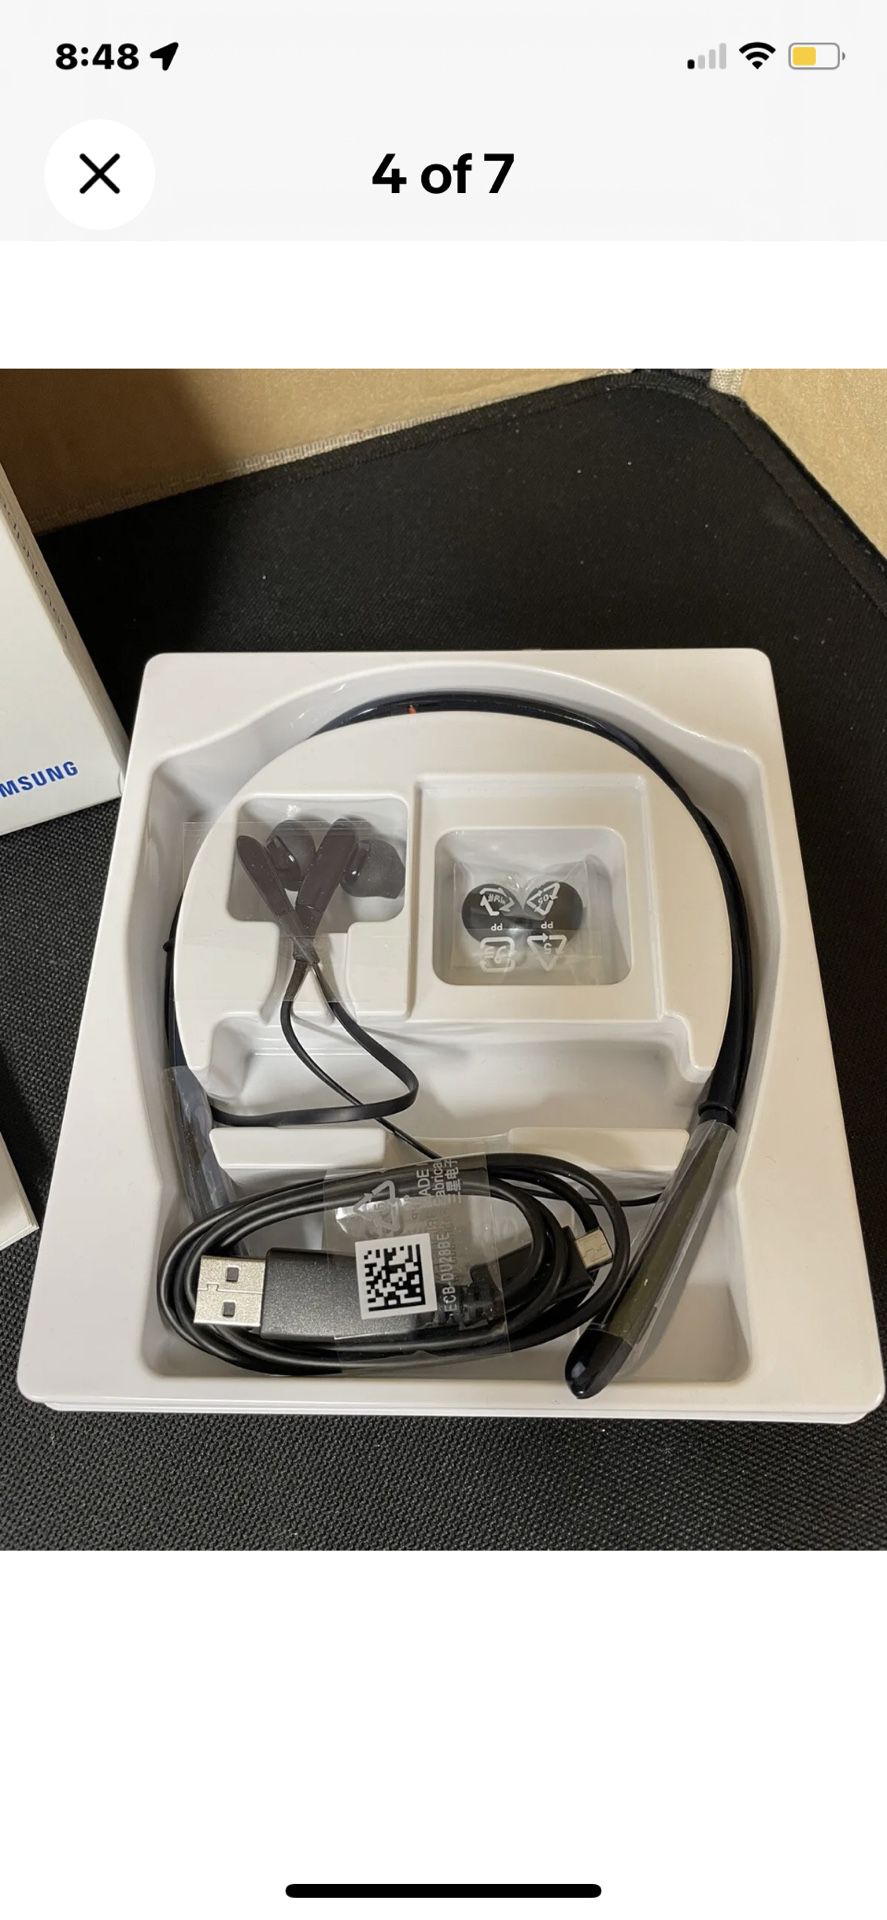 Samsung Level U Wireless Headphones Neckband.   Color- blue Brand new box has been  damaged and opened. The headphones are new in packa